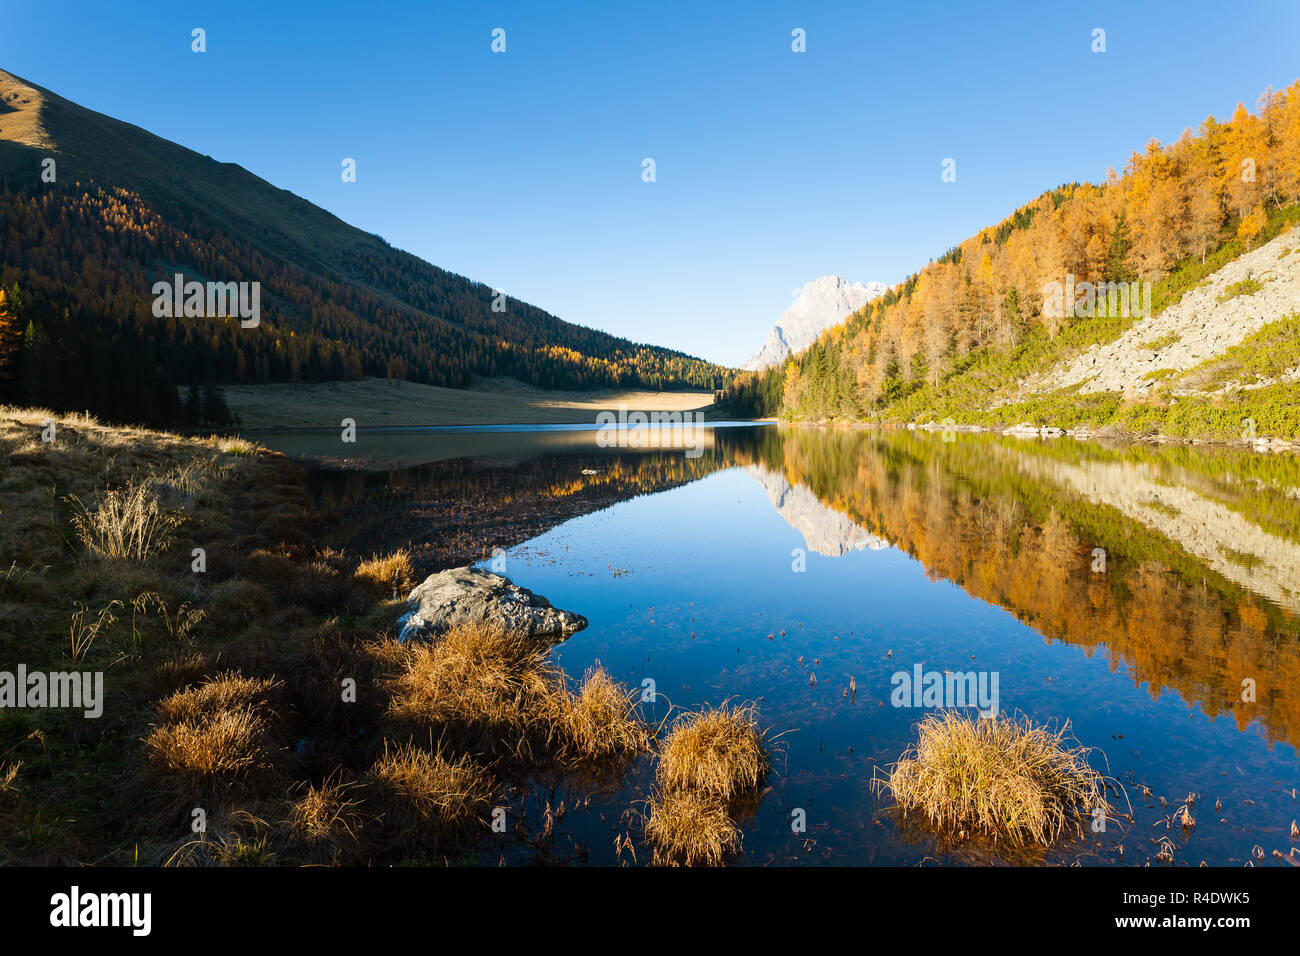 Reflections on water, autumn panorama from mountain lake Stock Photo